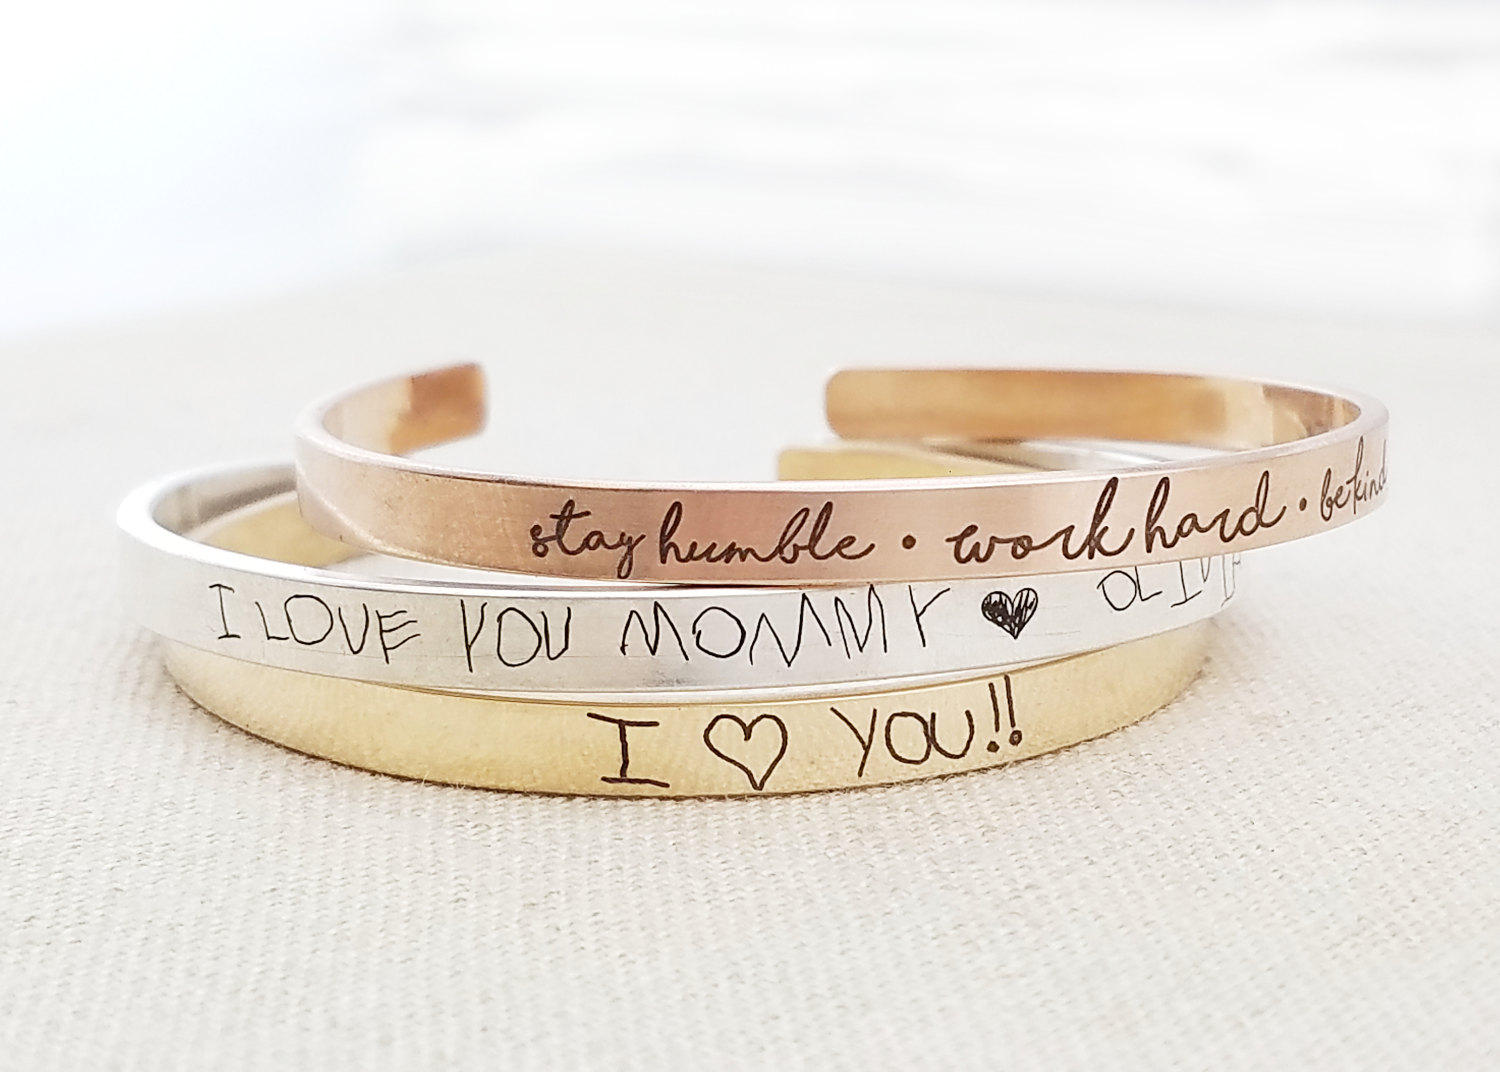 Creative personalized gifts: Custom cuff bracelet from handwriting by Emily J Design